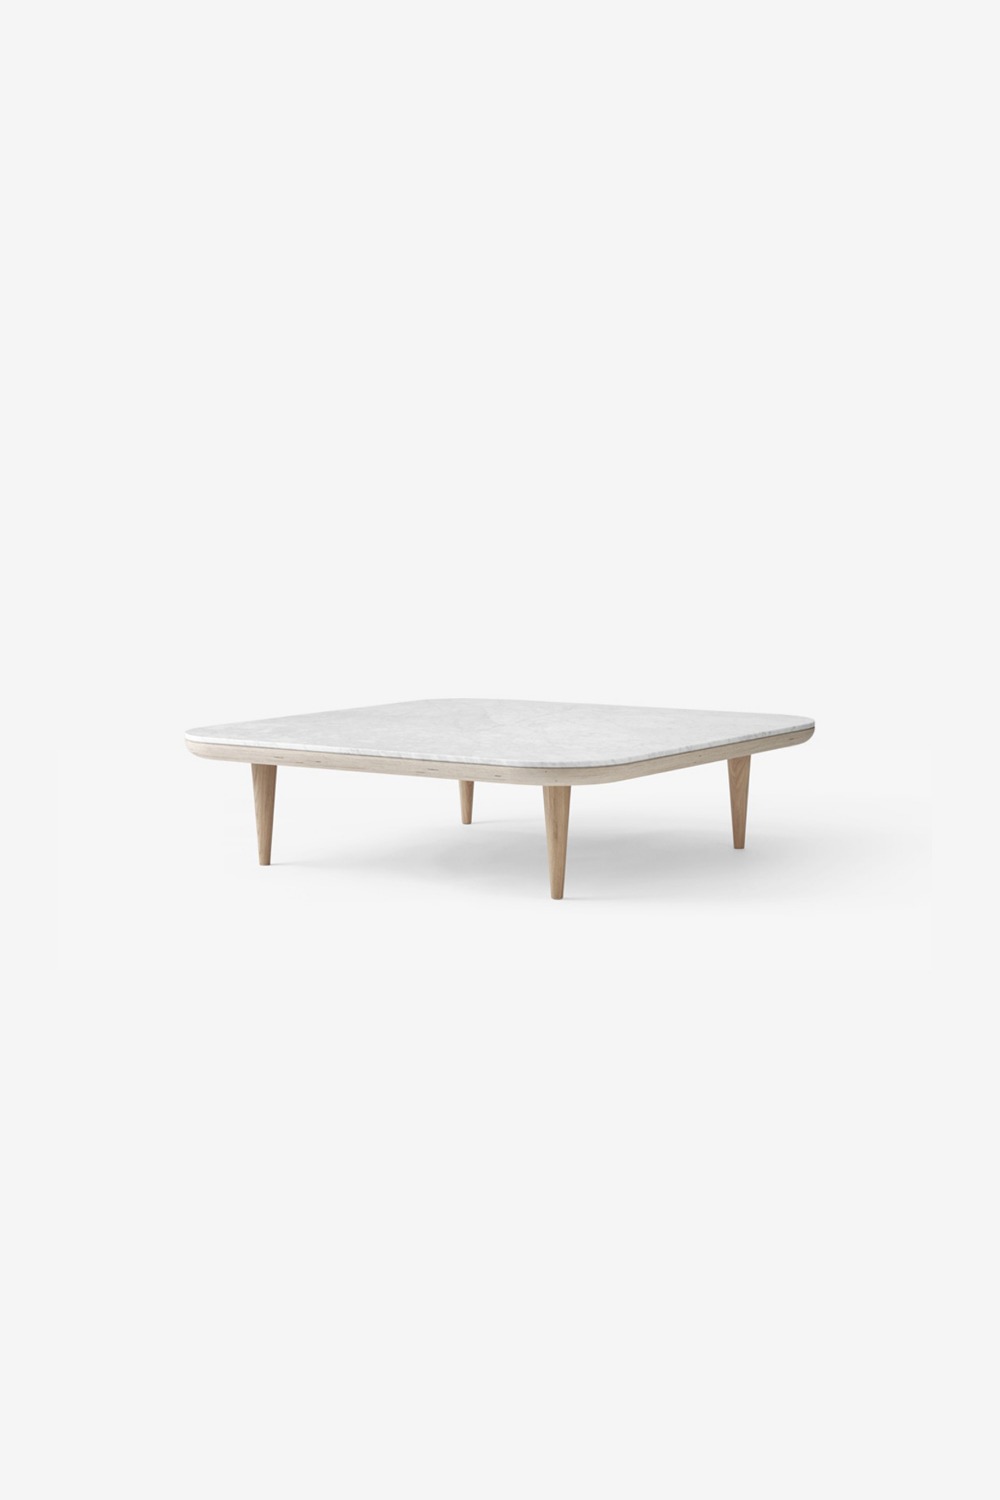 [&amp;Tradition] Fly Table / SC11 (Oiled oak)